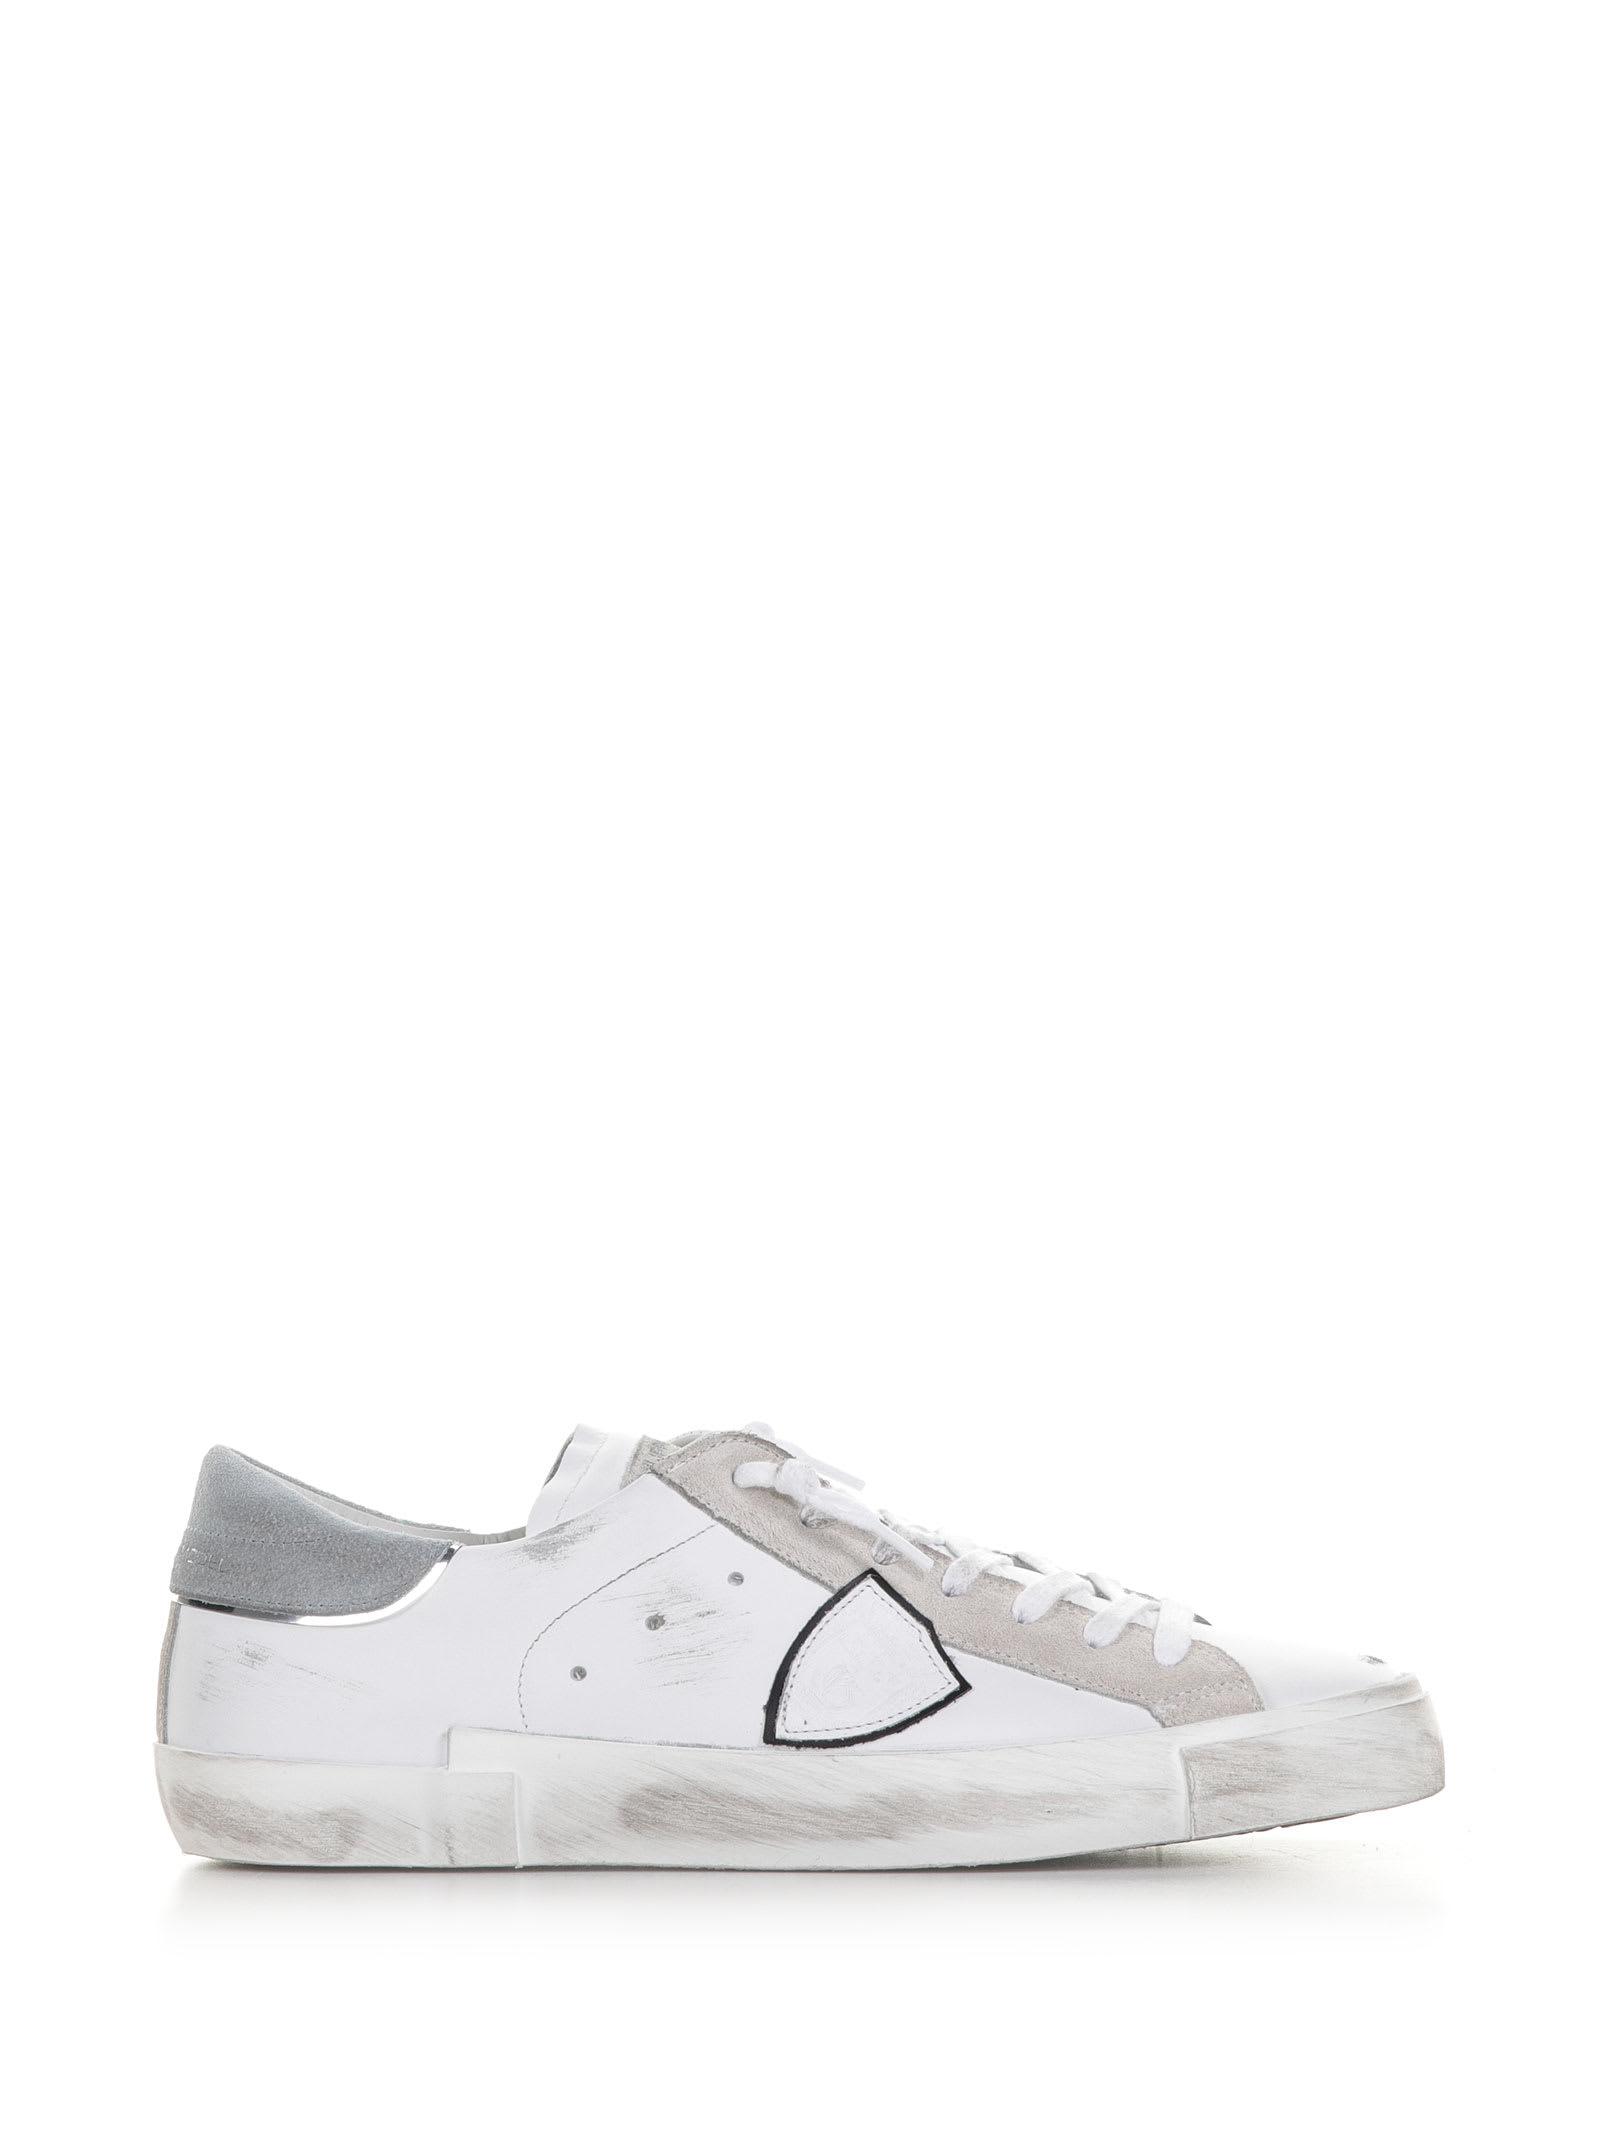 Philippe Model Prsx Sneaker With Gray Heel in White for Men | Lyst